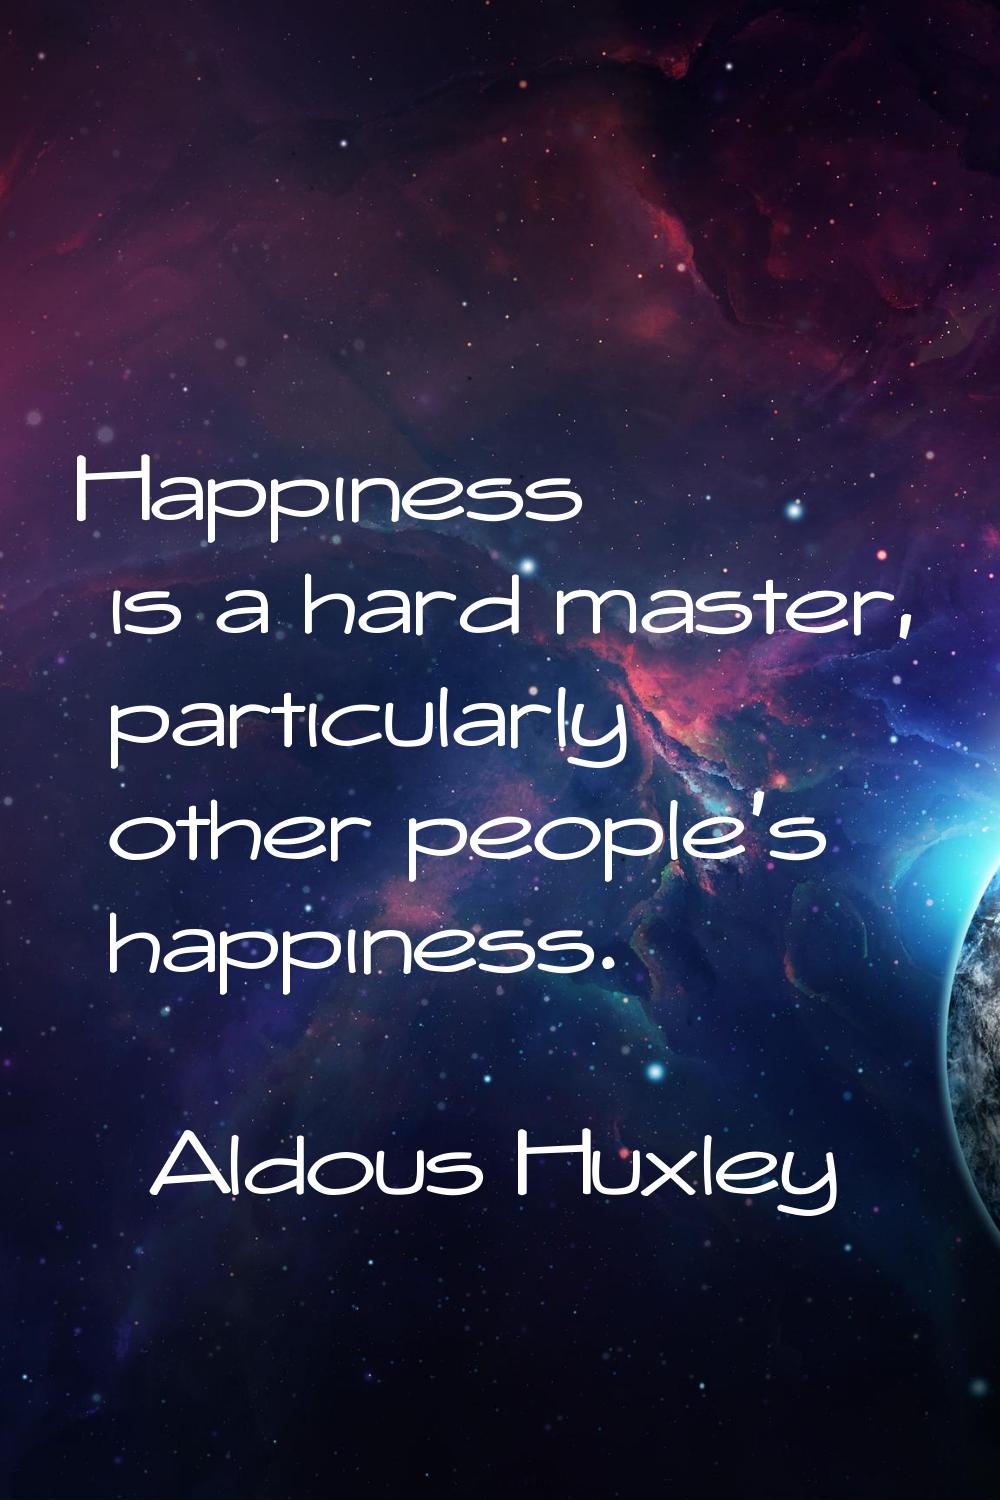 Happiness is a hard master, particularly other people's happiness.